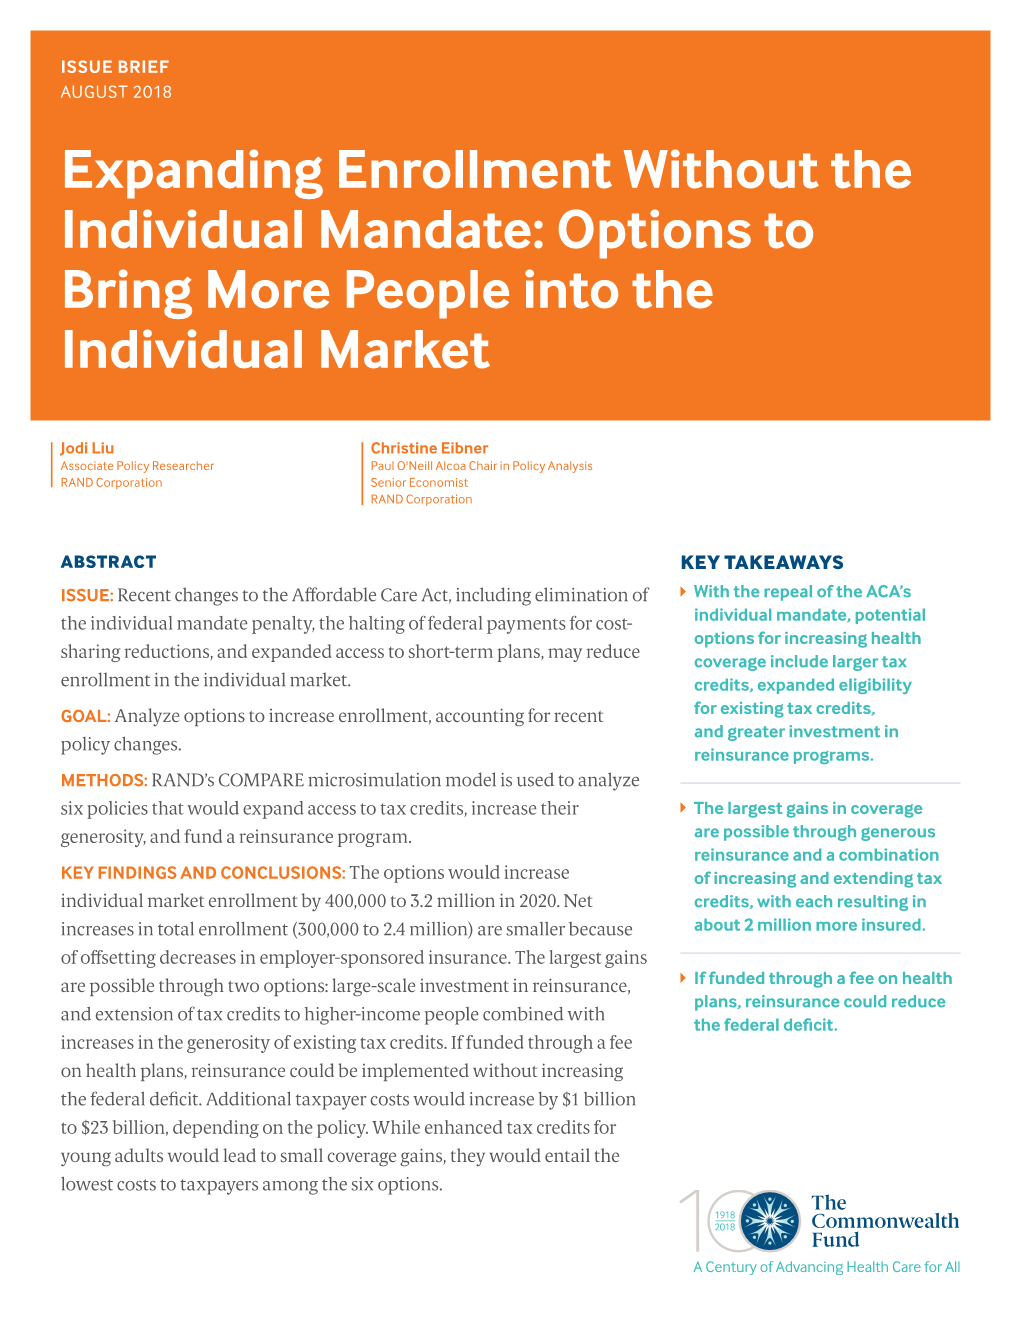 Expanding Enrollment Without the Individual Mandate: Options to Bring More People Into the Individual Market